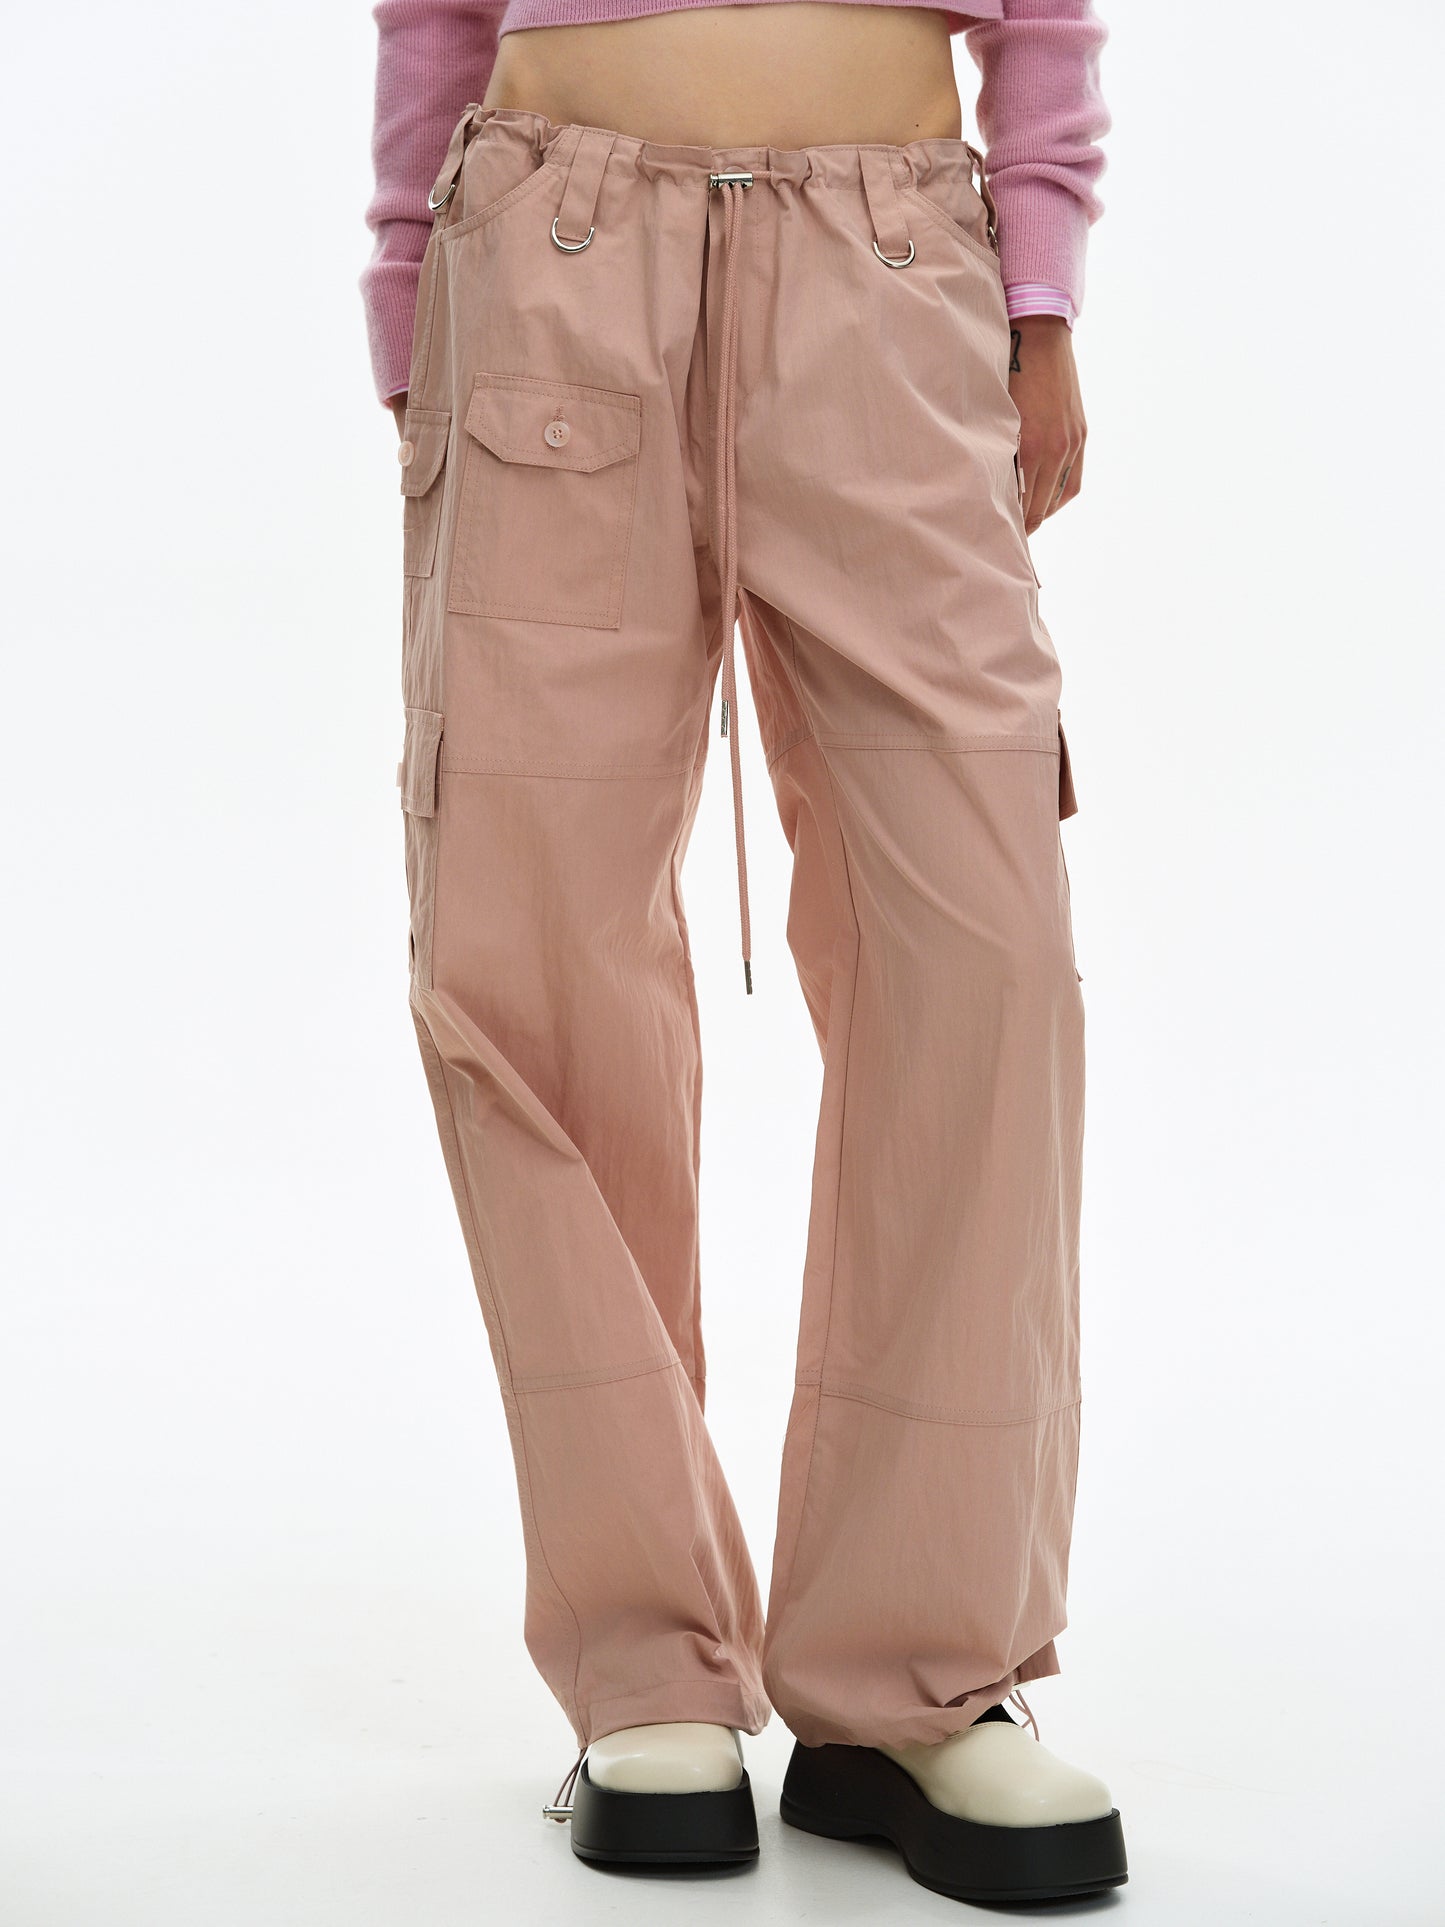 Parachute Cargo Trousers, Dusty Pink – SourceUnknown